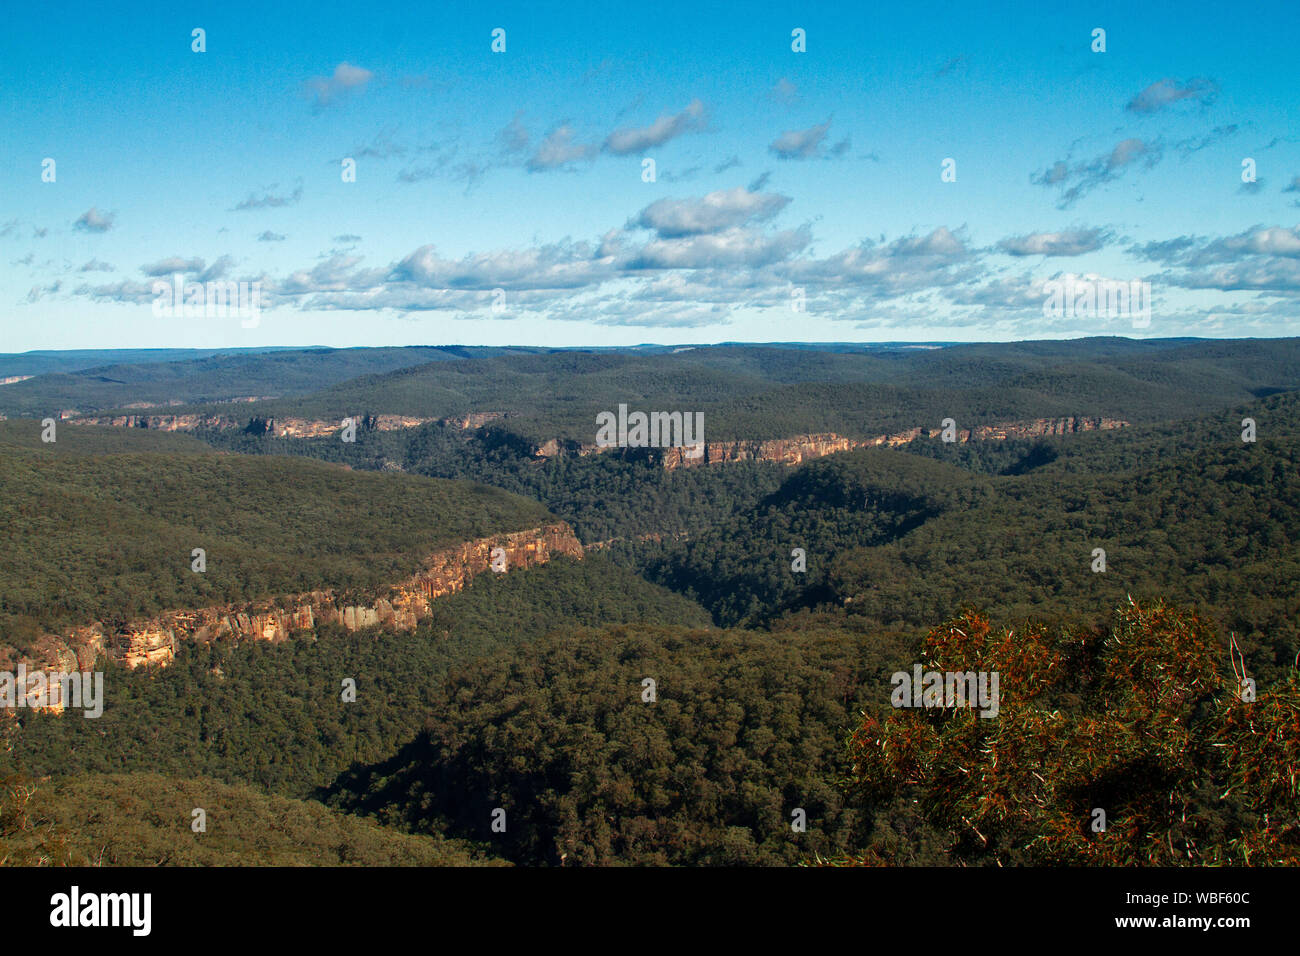 Stunning view of landscape of forested hills of Great Dividing Range severed by rugged gorges stretching to distant horizon & blue sky , NSW Australia Stock Photo